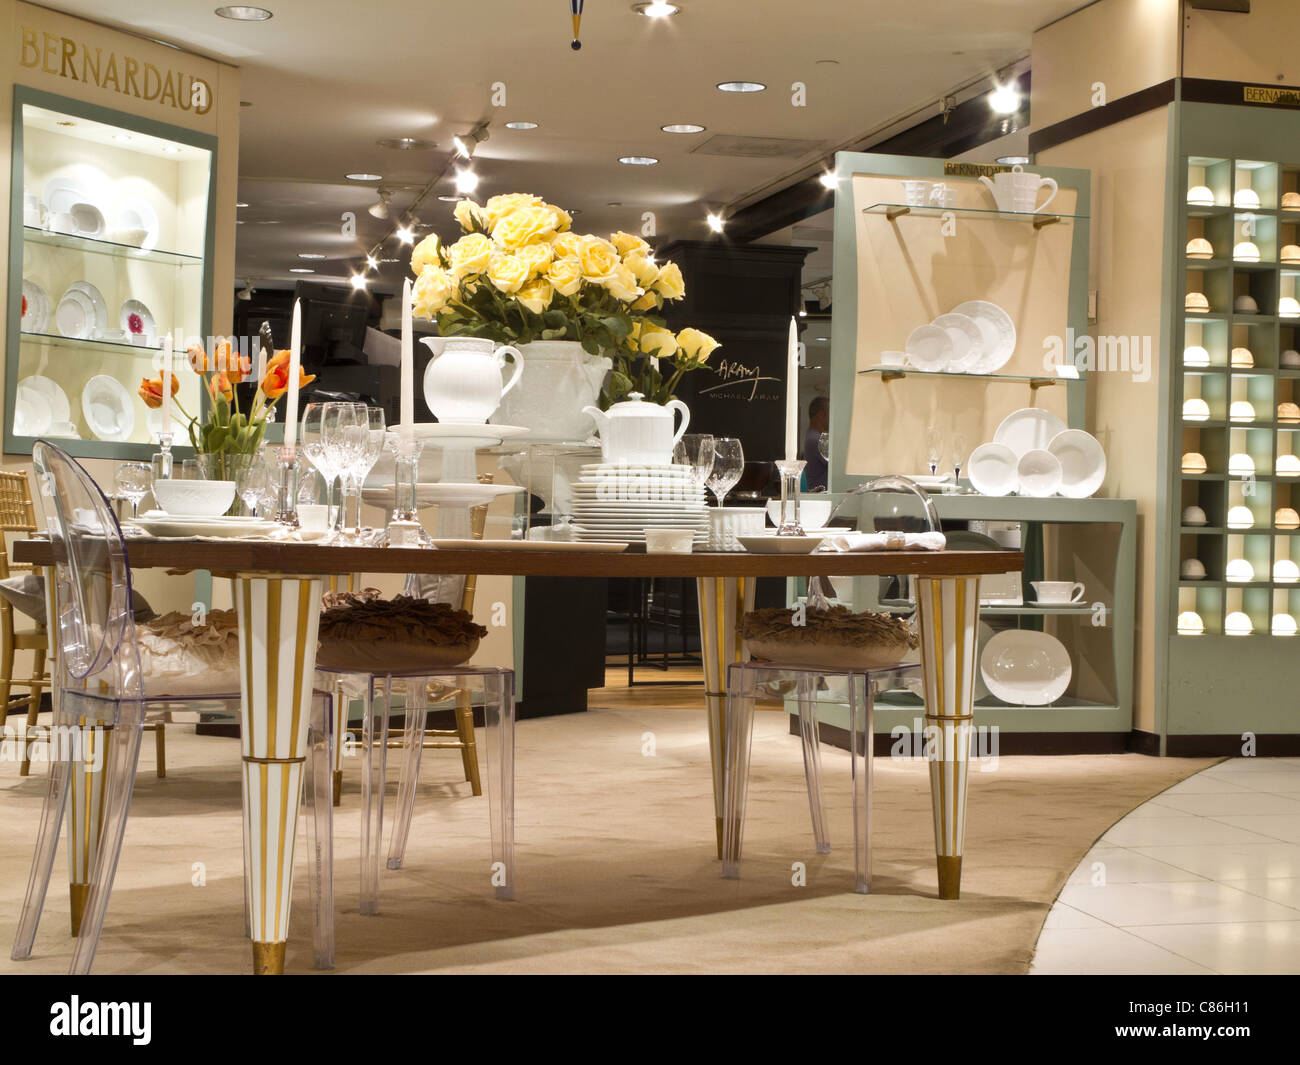 China and Crystal Display, Bloomingdale&#39;s Department Store Interior Stock Photo: 39483053 - Alamy